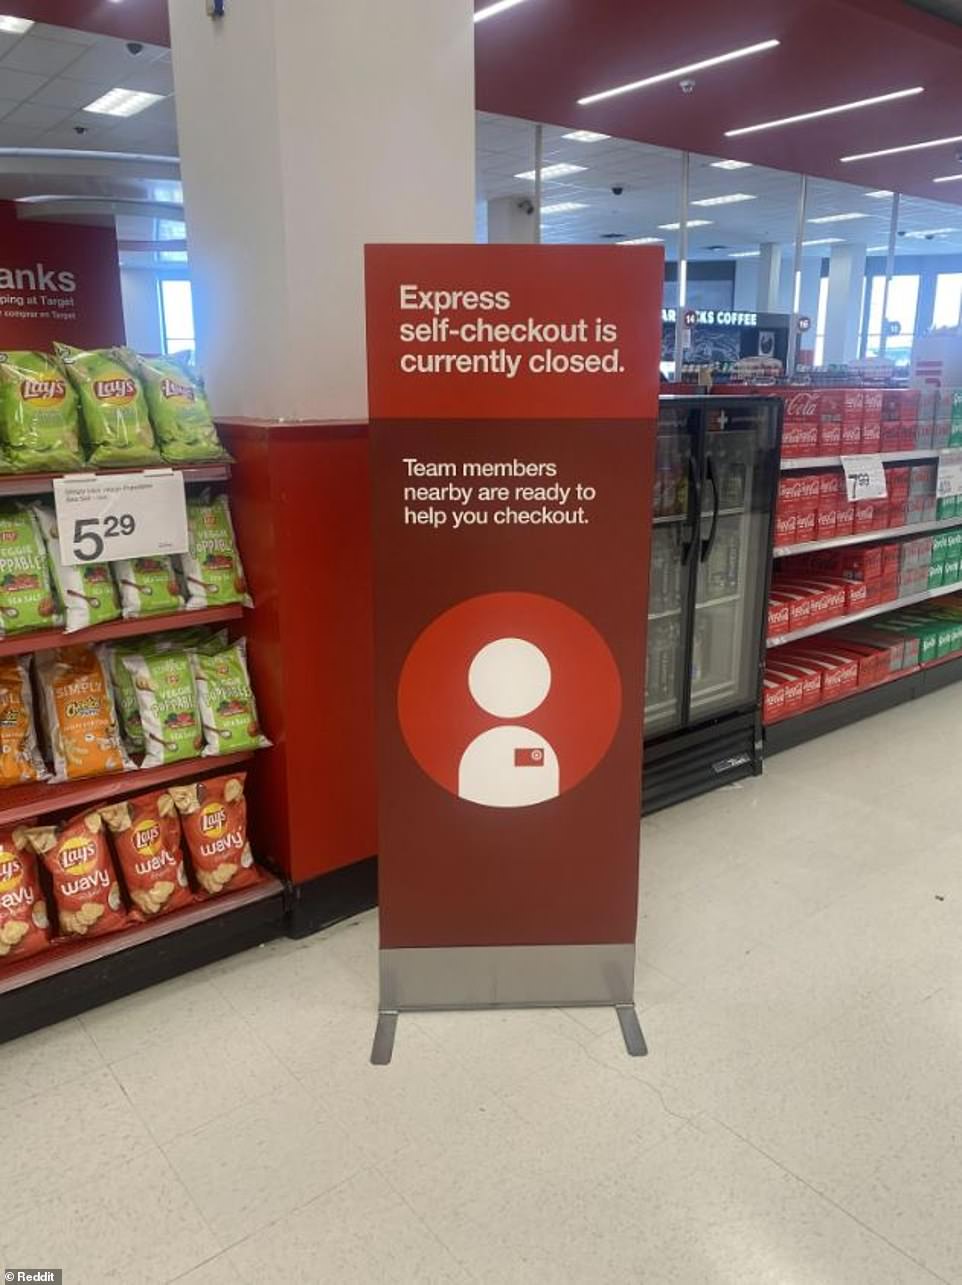 A sign reads: 'Express self-checkout is currently closed. Team members nearby are ready to help you checkout.' Lines at the store are now longer, shoppers say. Jennifer Mendez told KRON4 that shopping is more complicated for her. 'Usually when I go into Target or another store, if there is no self-checkout, it's harder for me with two toddlers under 5,' she said.